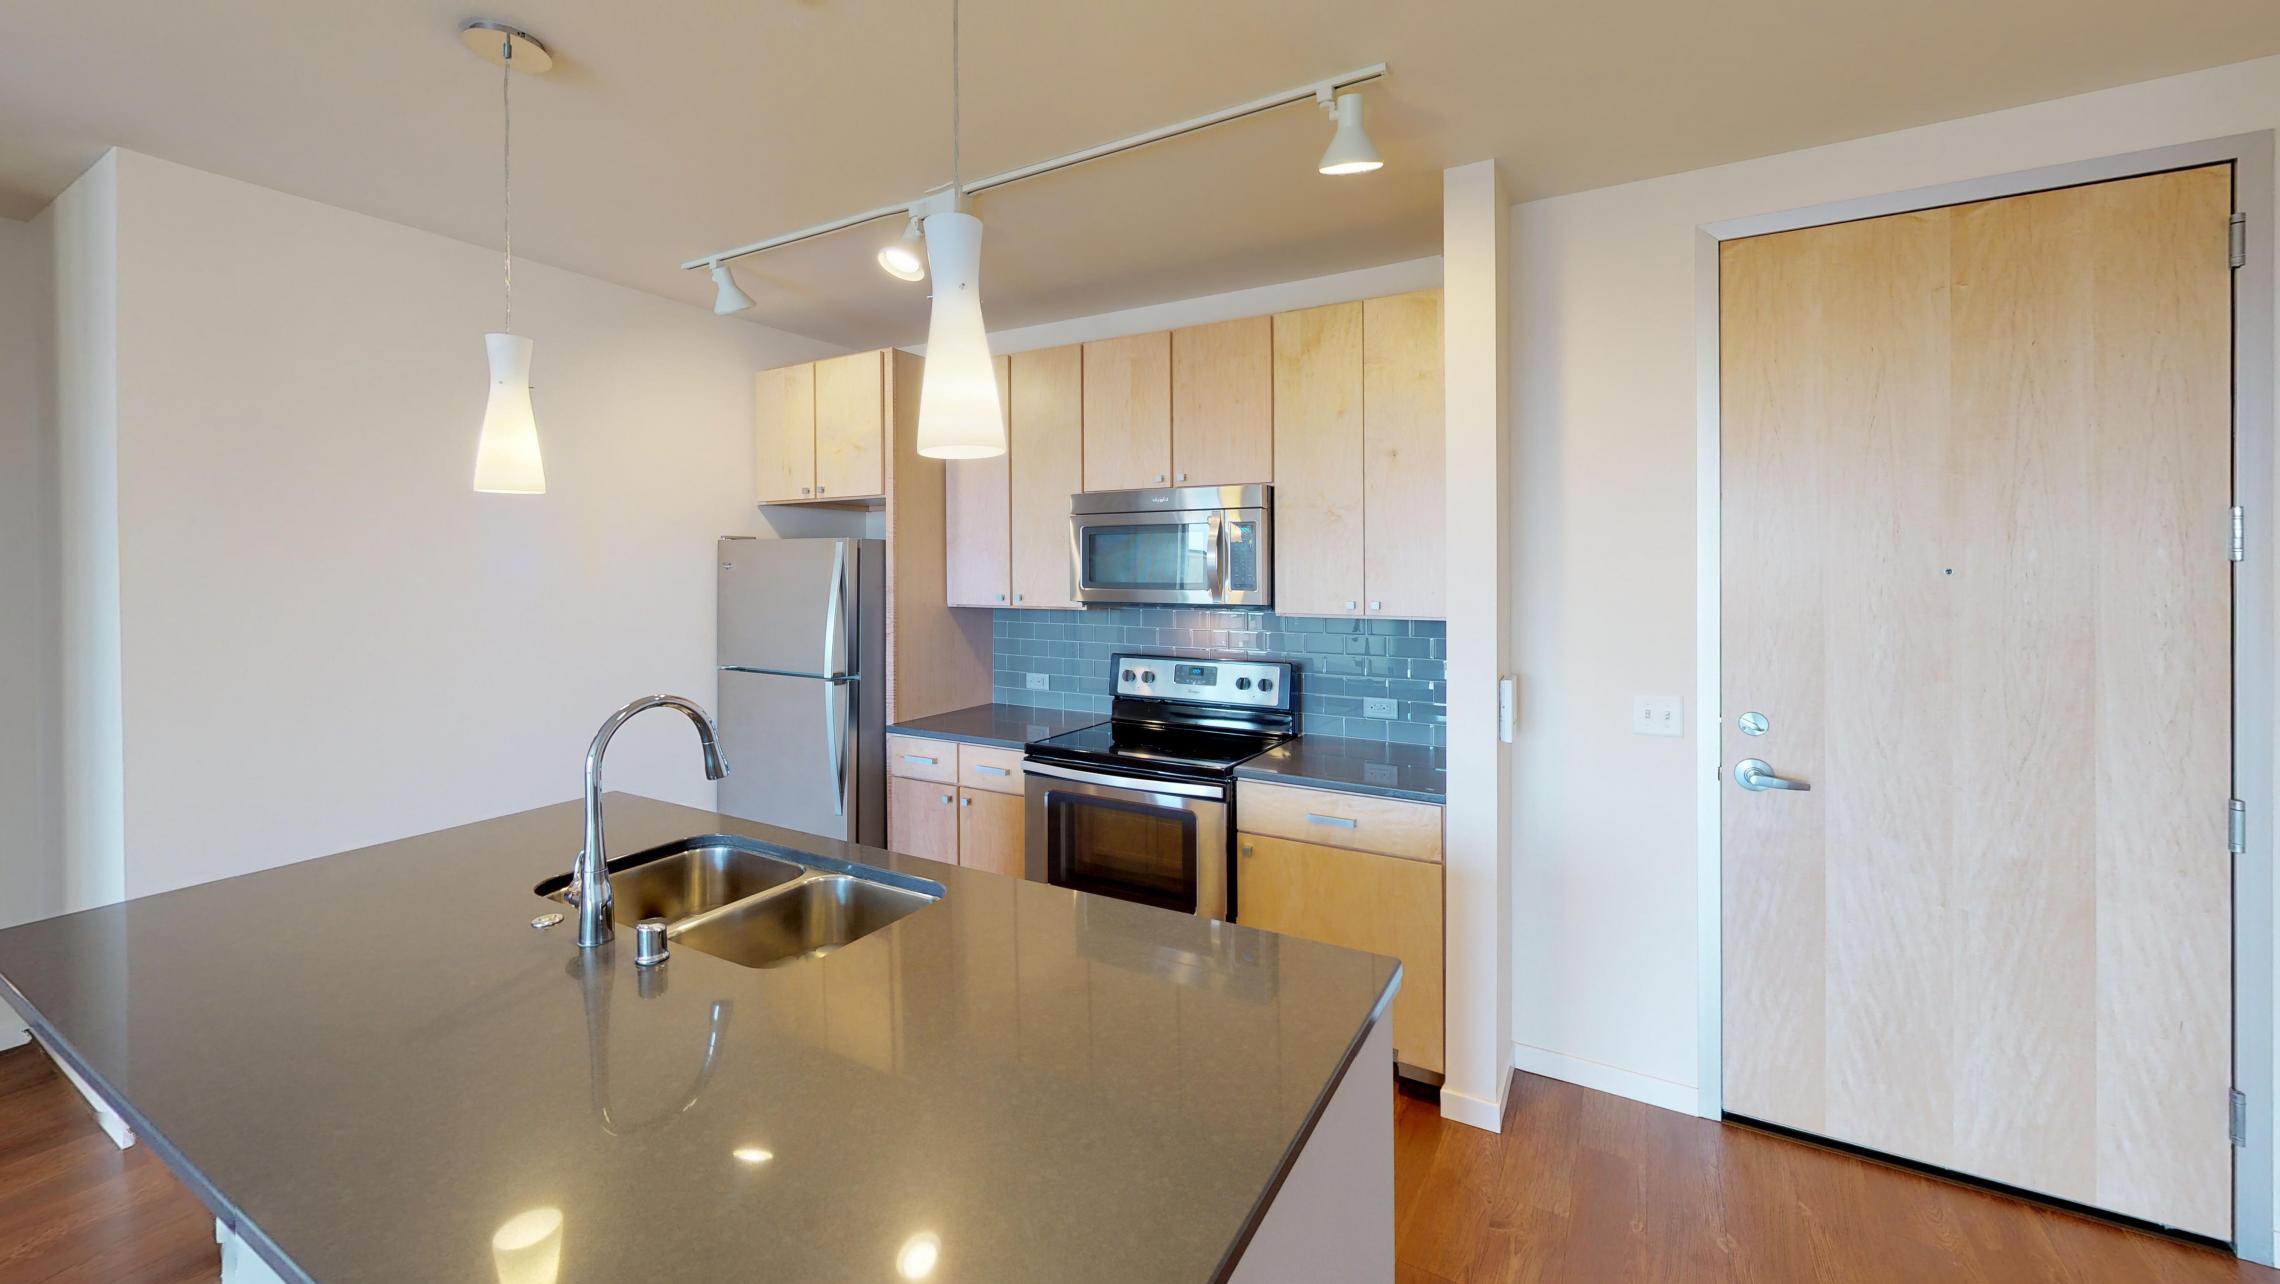 Nine-Line-Apartment-321-One-Bedroom-Kitchen-Living-Bathroom-Downtown-Madison-Lake-View-Bike-Path-Fitness-Sunny-Upscale-Modern-Design-Style-Balcony 